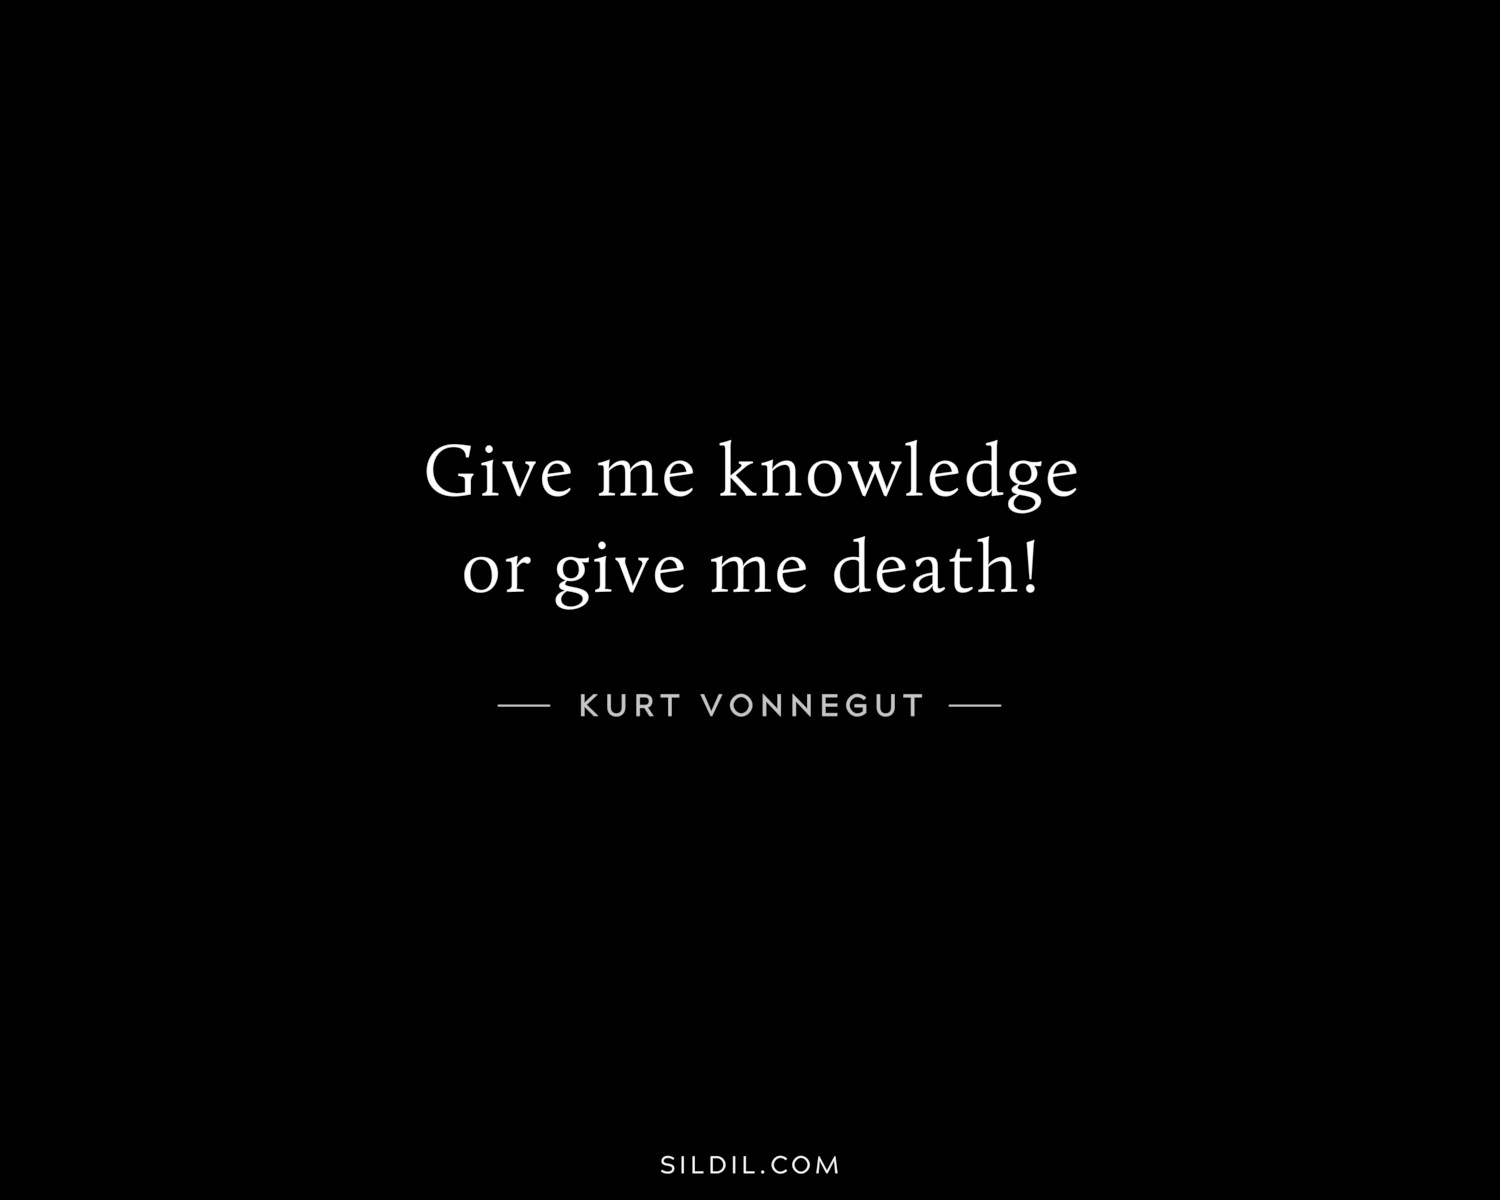 Give me knowledge or give me death!